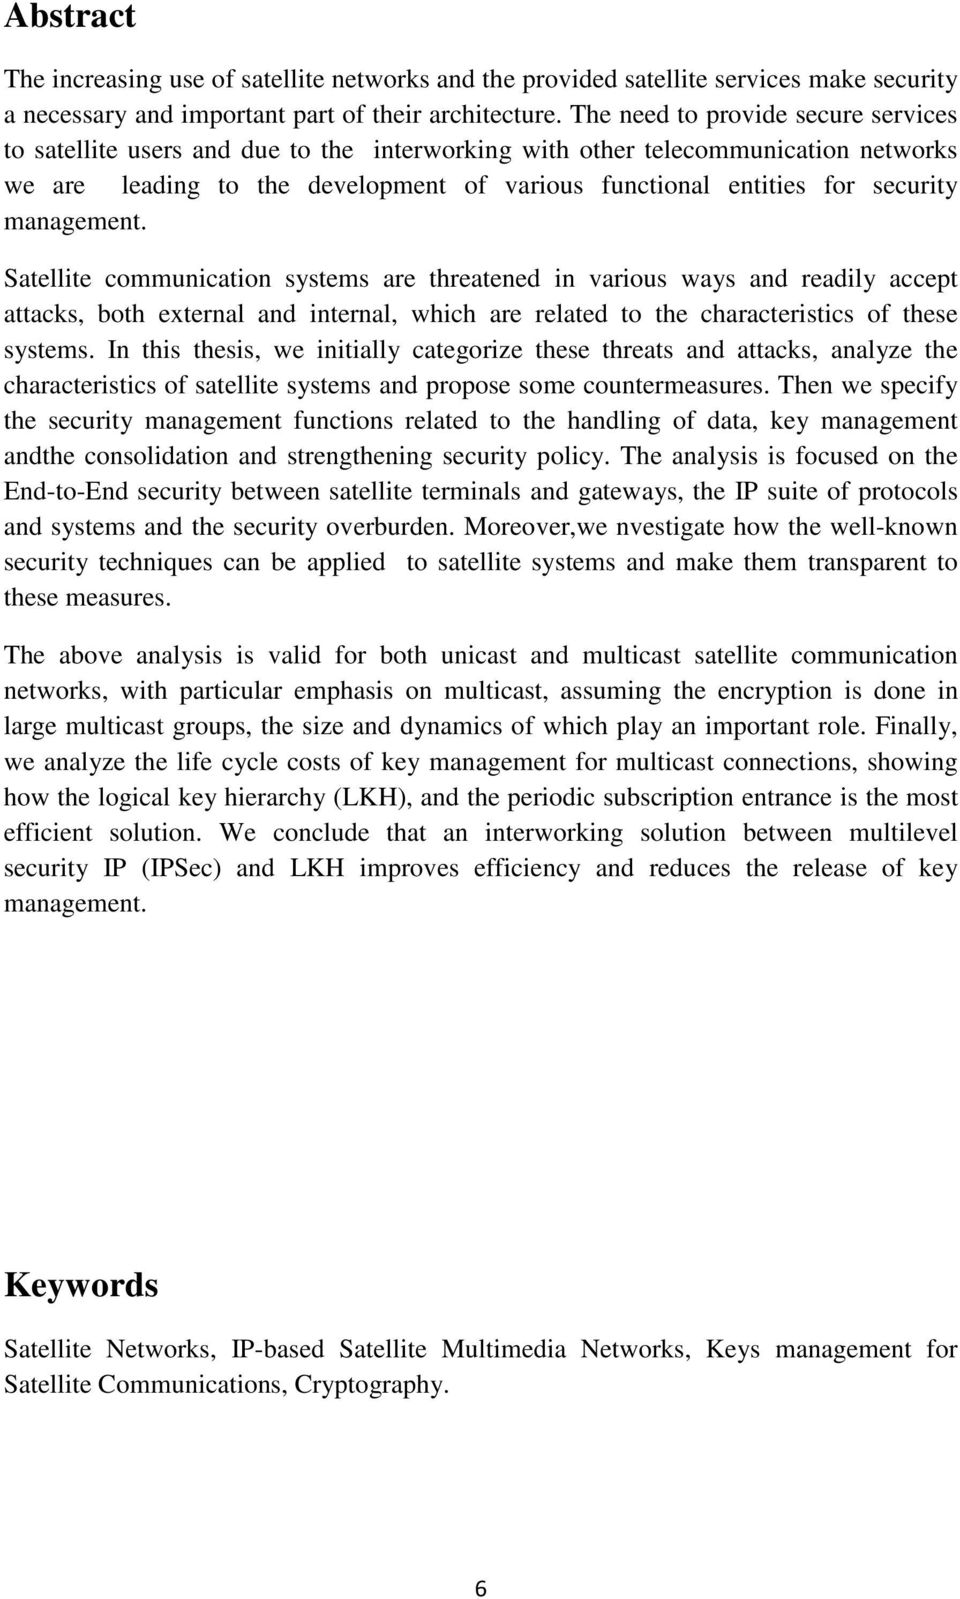 management. Satellite communication systems are threatened in various ways and readily accept attacks, both external and internal, which are related to the characteristics of these systems.